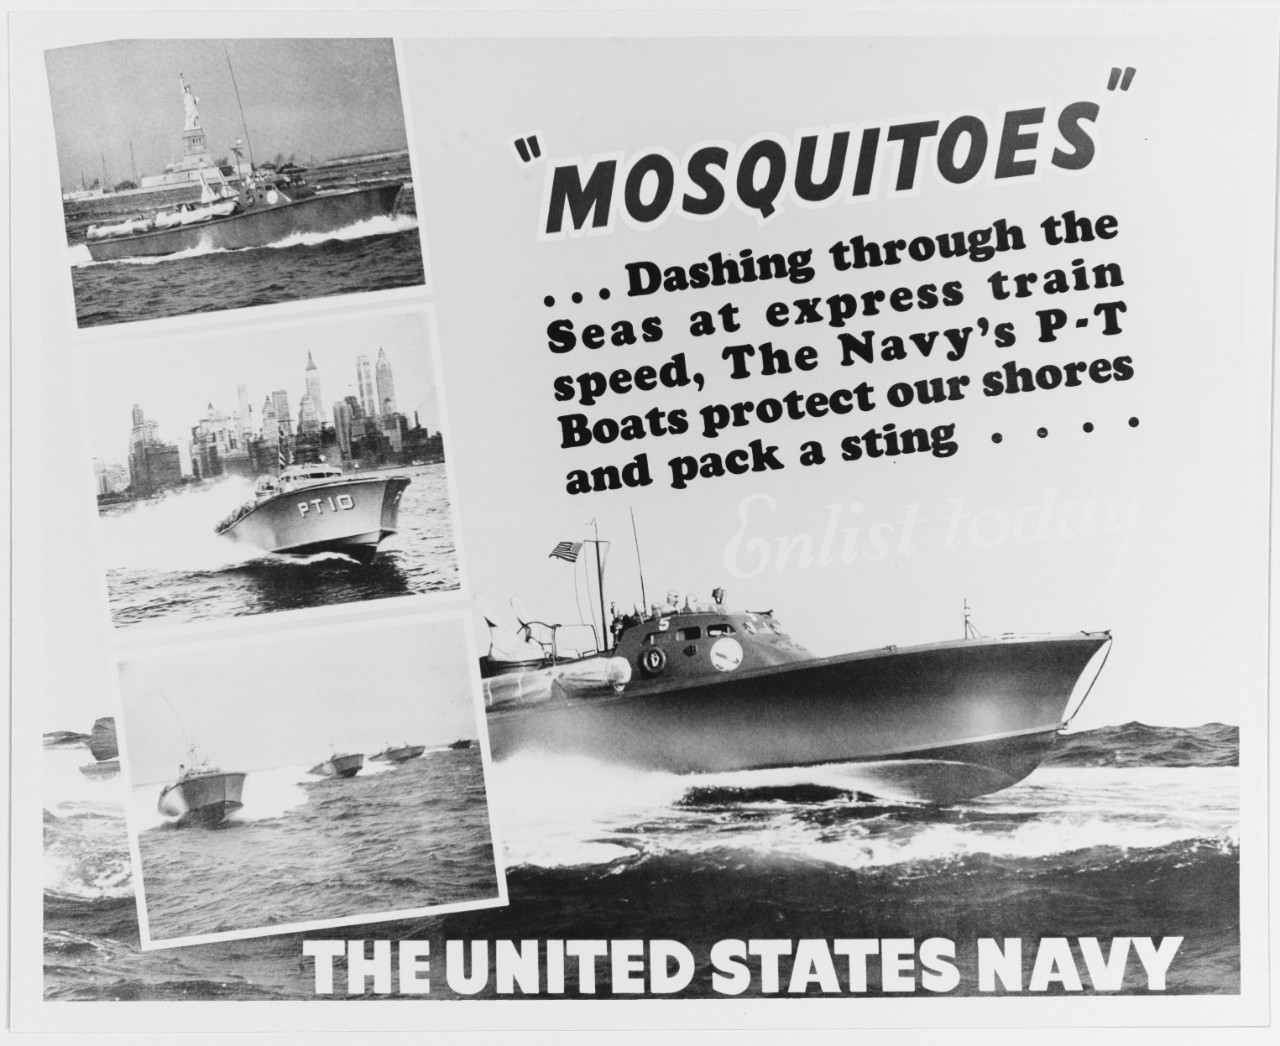 Navy recruiting poster, 1941, "Mosquitoes"